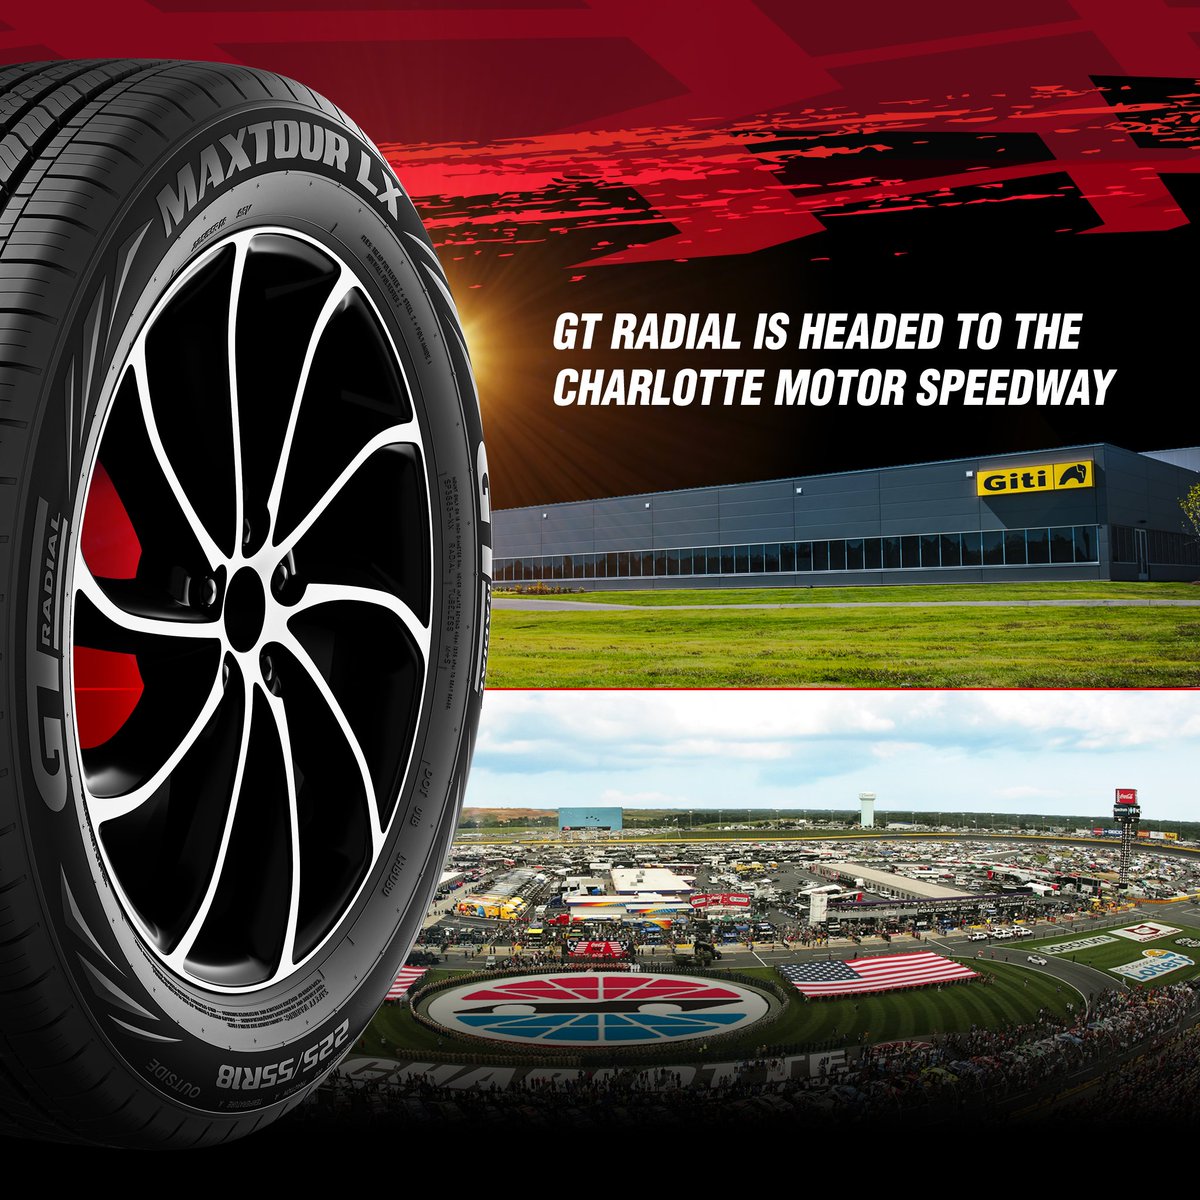 We are headed to the Charlotte Motor Speedway for our Maxtour LX Ride and Drive event on Tuesday. Stay tuned for our coverage, live feeds and more. Check out the new tire at MaxtourLX.com and experience the performance.